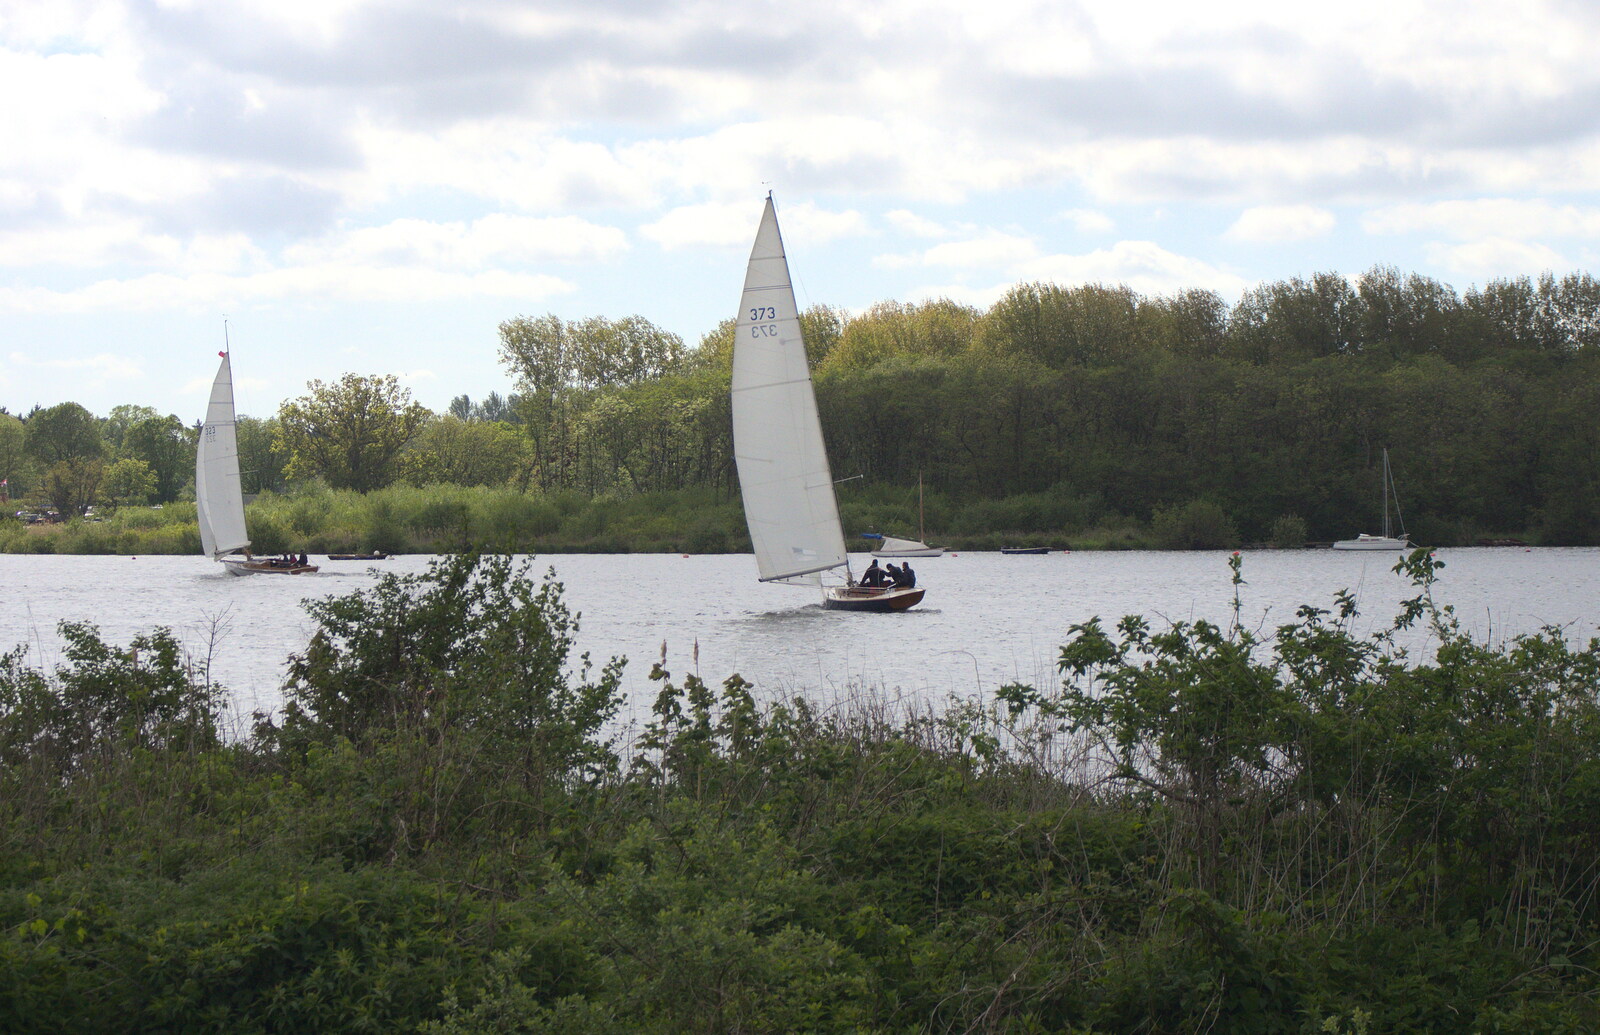 More sailing on the broads from A Trip on the Norfolk Broads, Wroxham, Norfolk - 25th May 2013